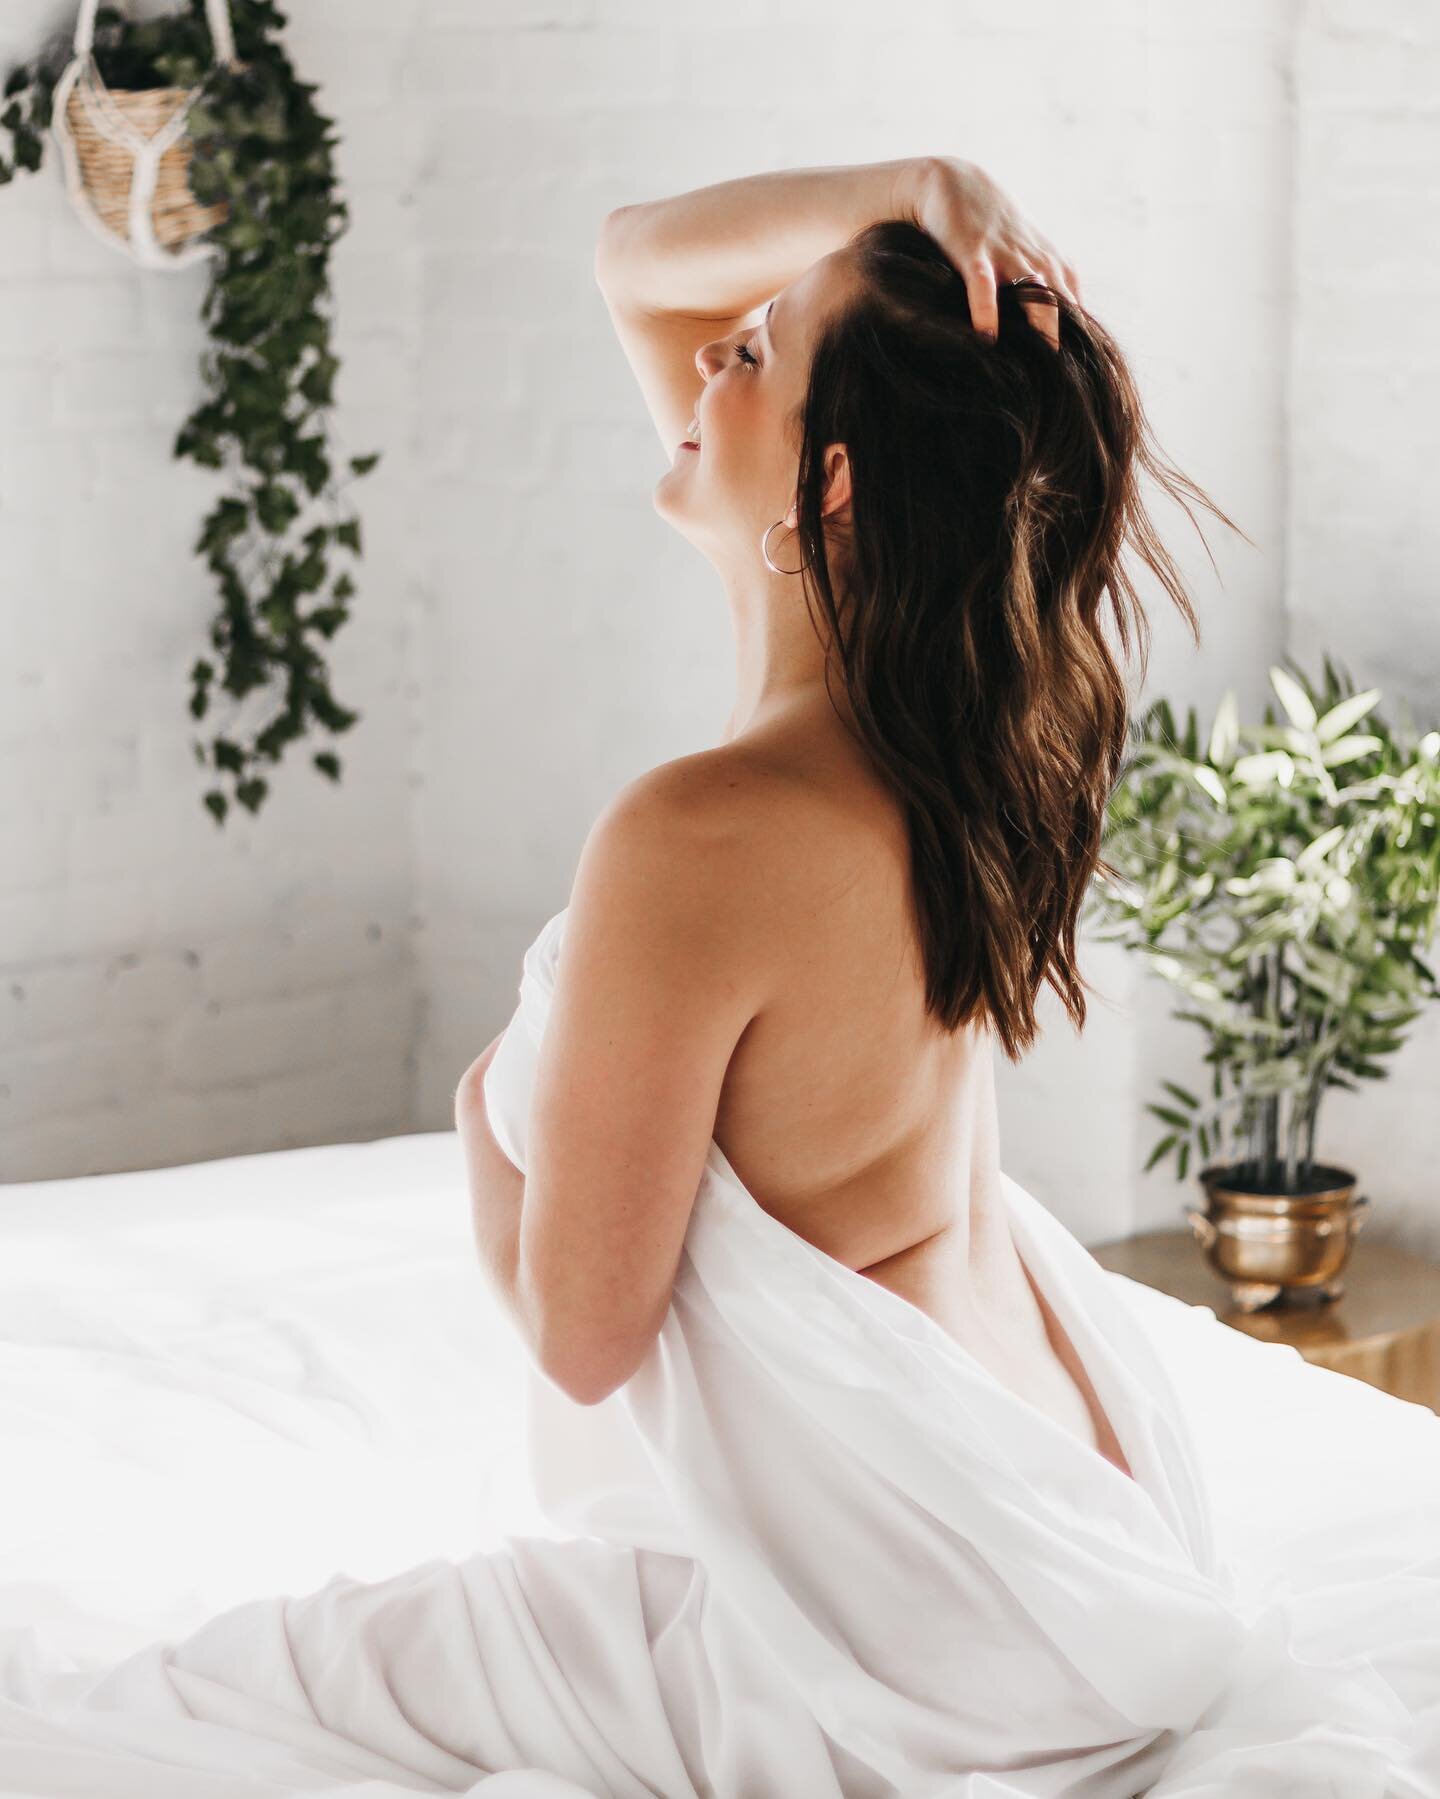 This year I have definitely found a love for boudoir sessions. Cheering on women and watching them become more confident and comfortable in their skin in front of the camera is so fun. Can&rsquo;t wait to get into the studio this weekend with two new